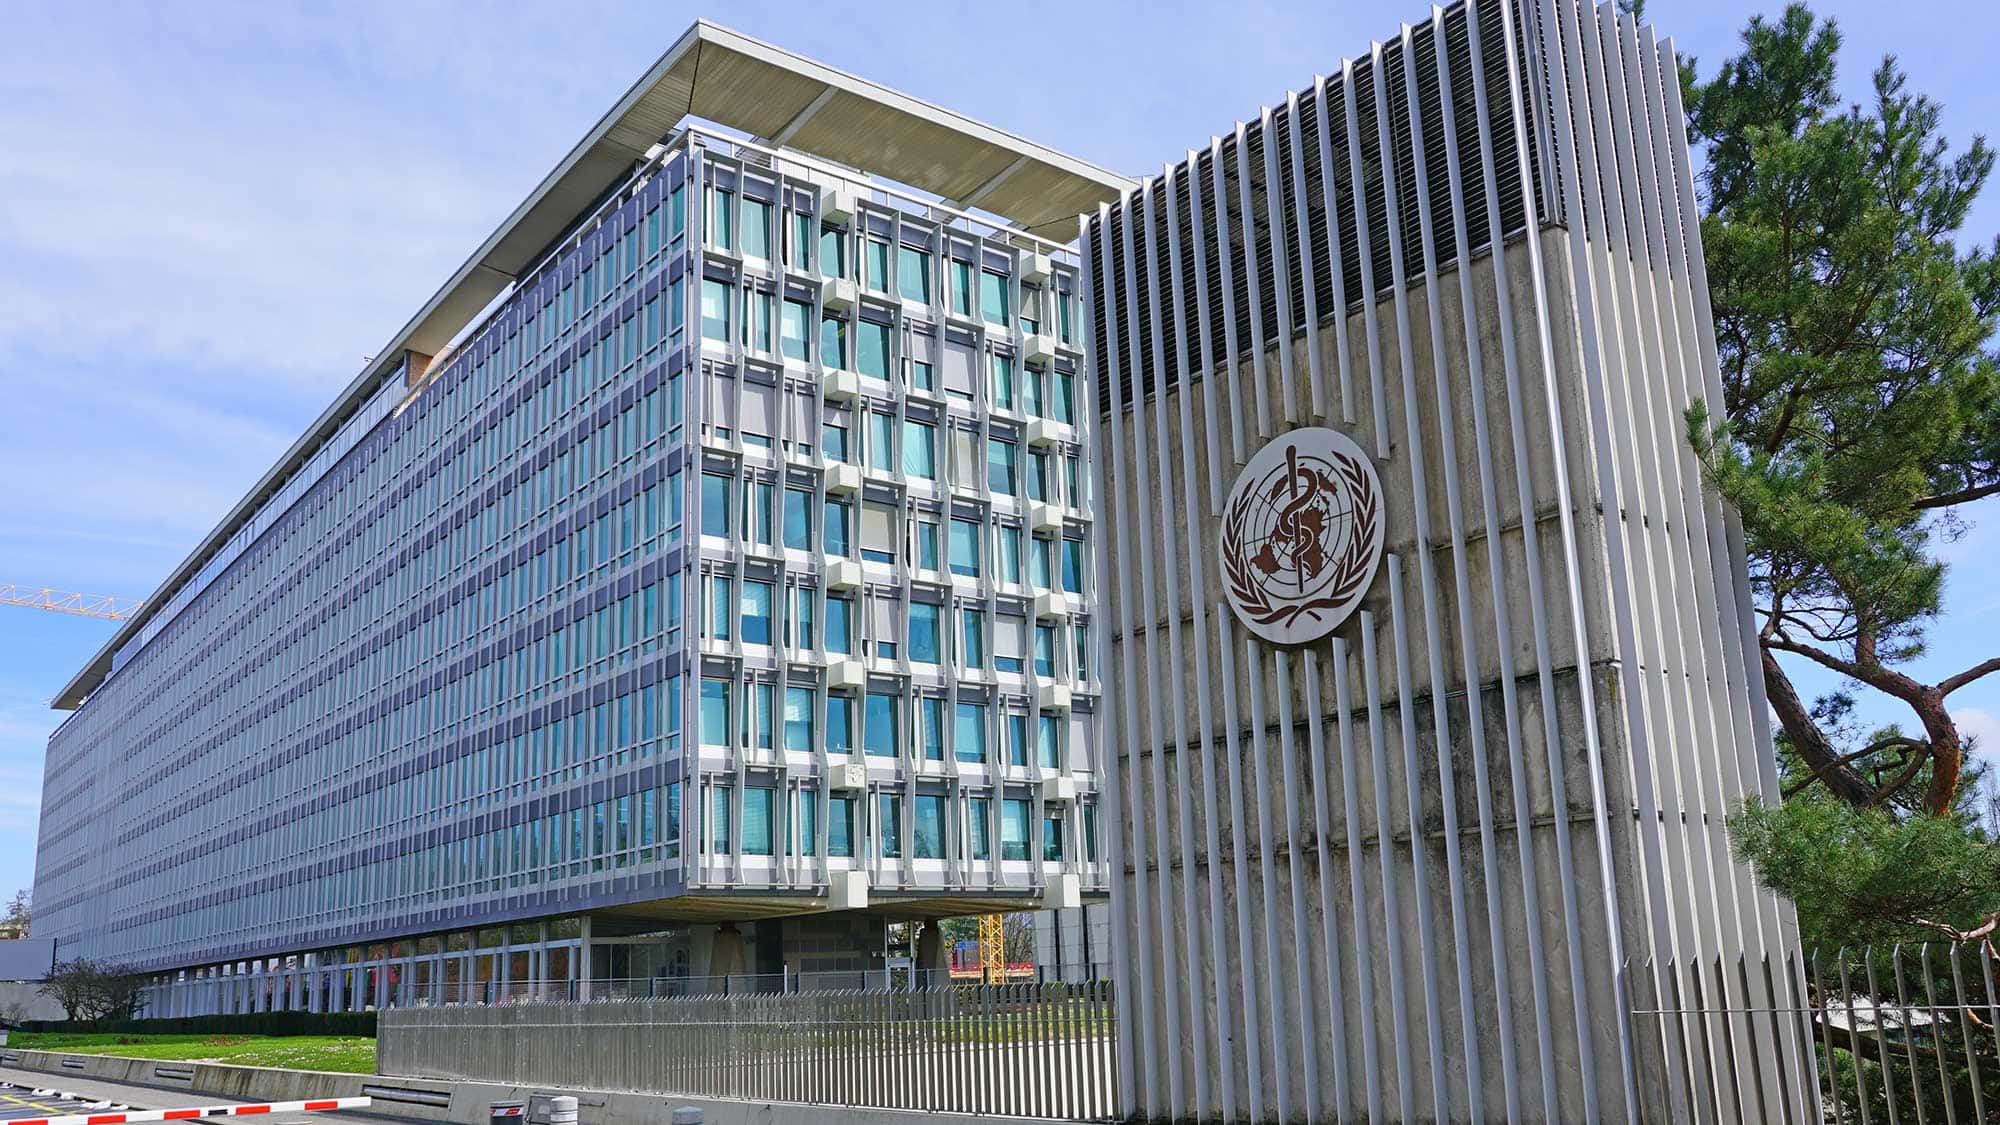 Building of the Federal Office for Radiation Protection. Institutions around the world are researching possible health risks from radiation - including in Germany, such as the Federal Office for Radiation Protection. 